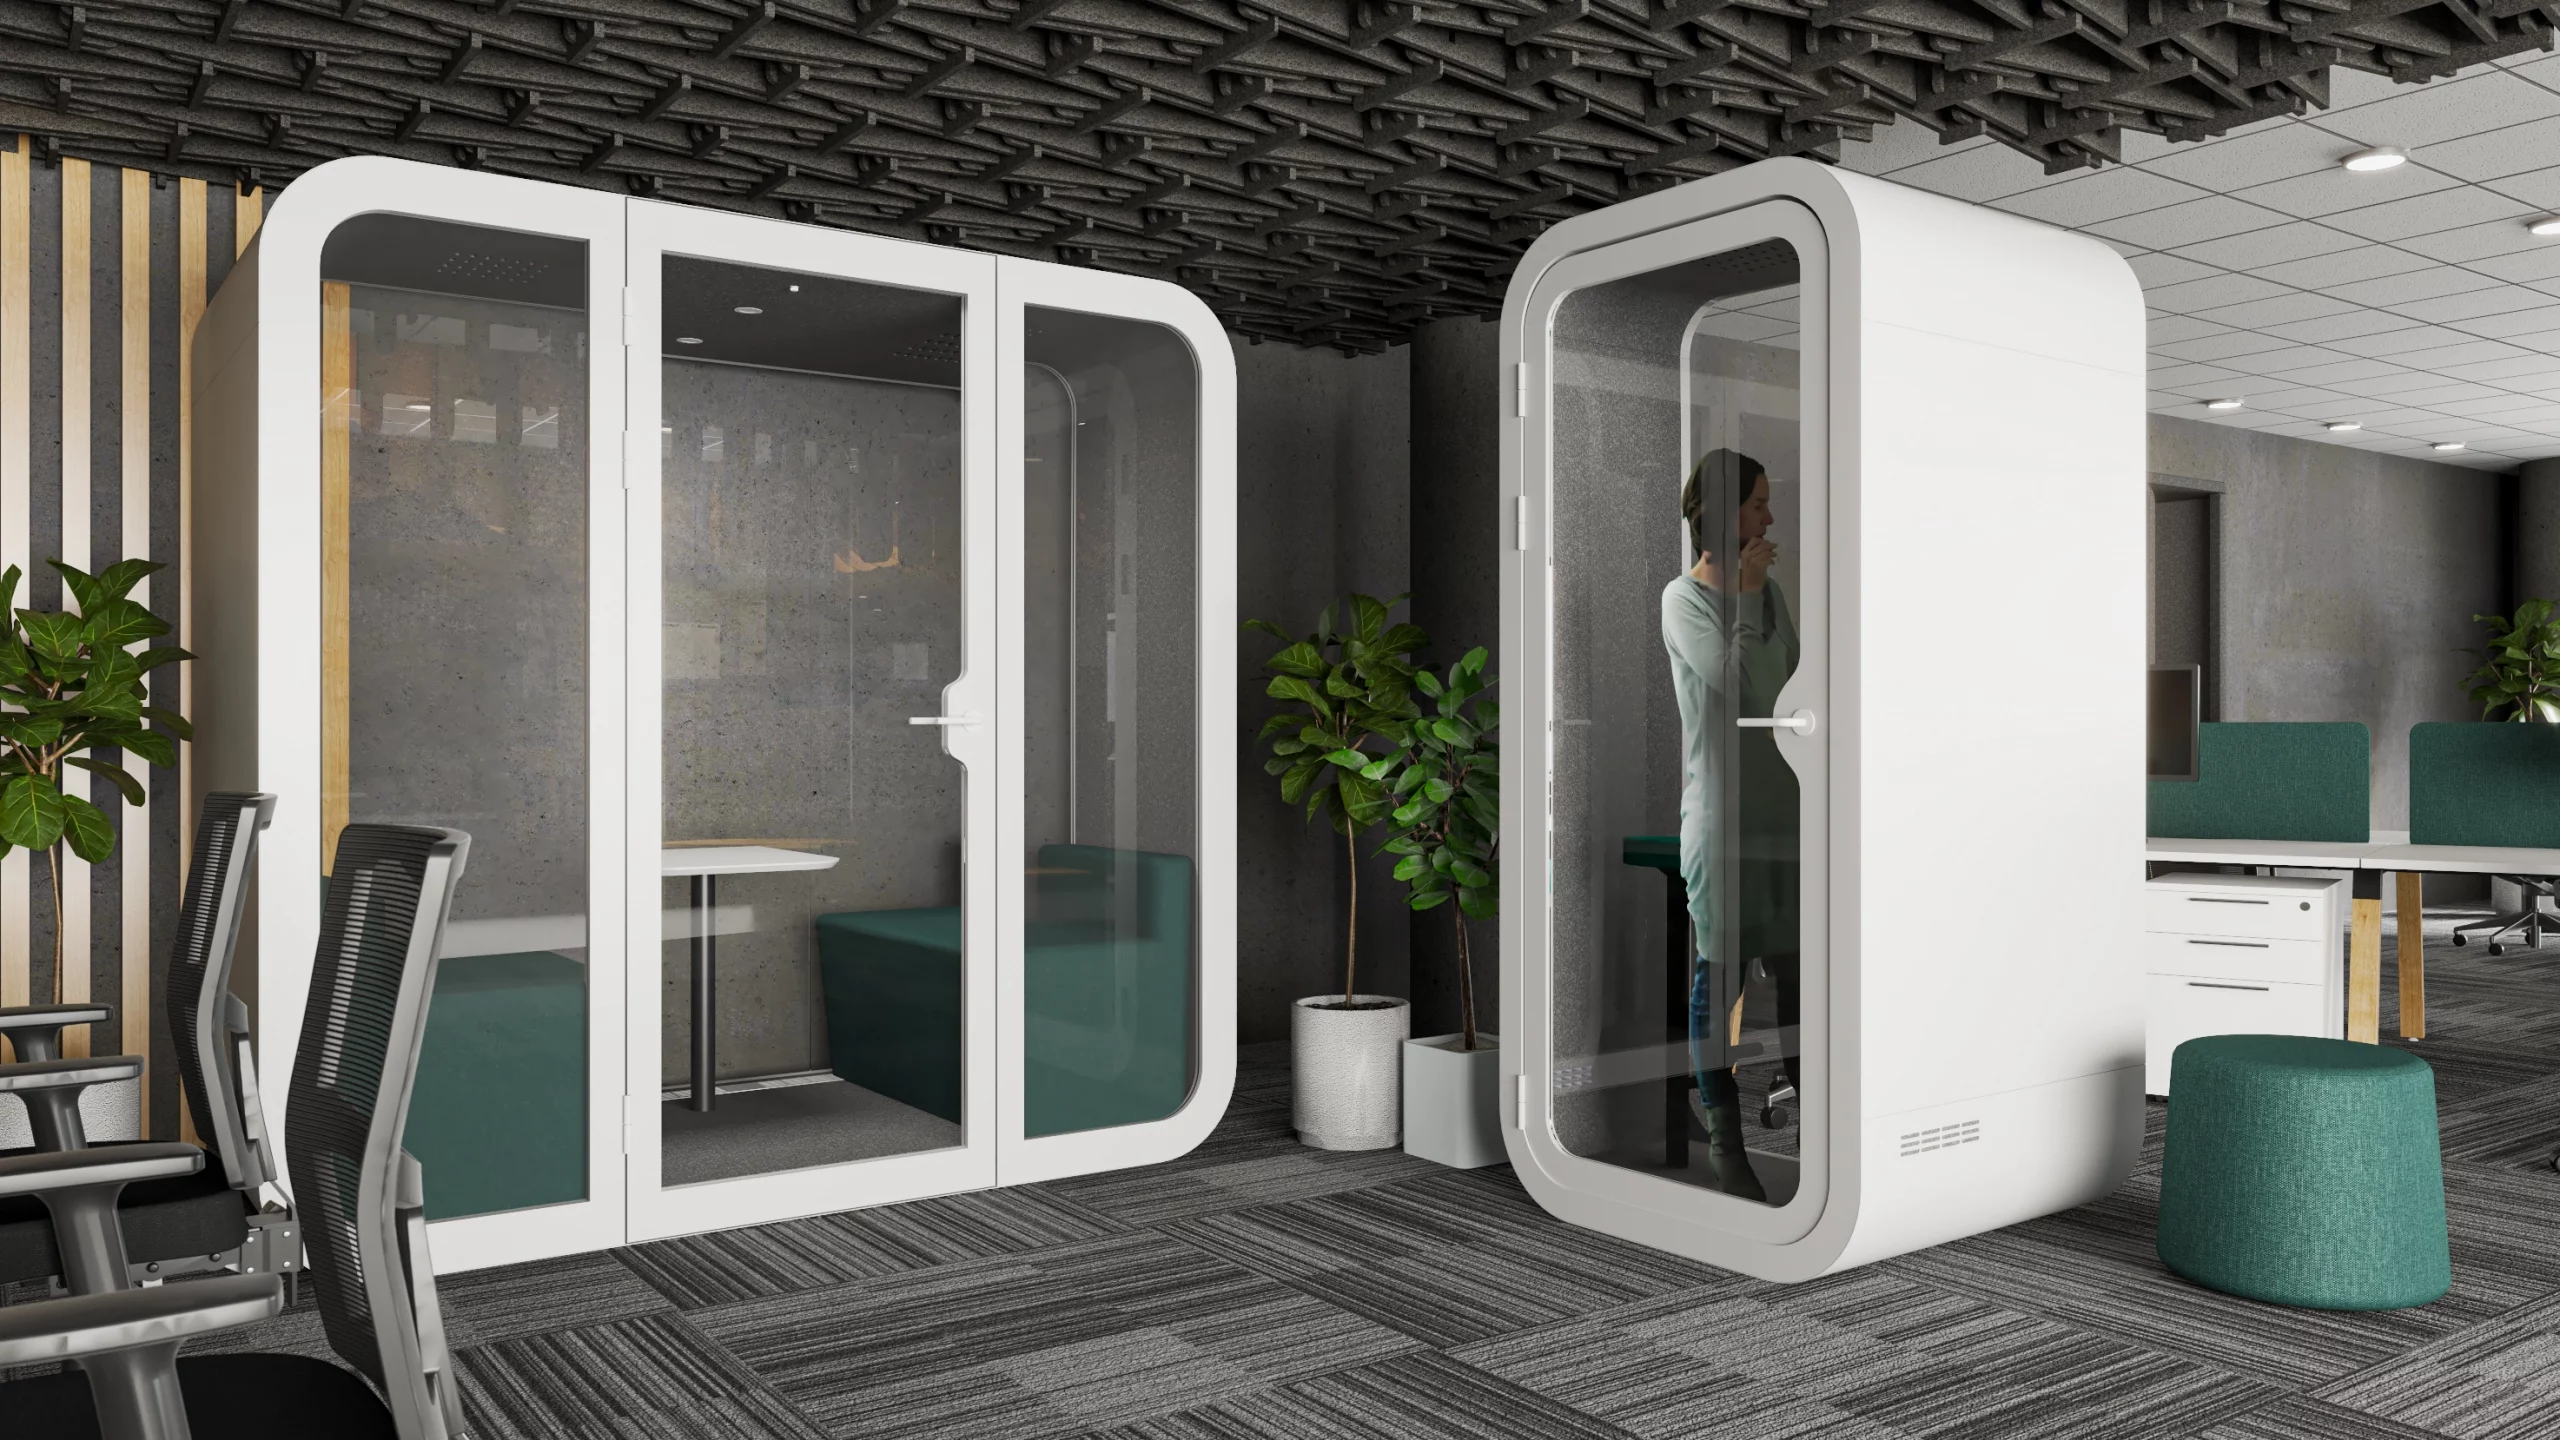 What’s the Difference Between the QZone and the SpacePod Phone Booth?